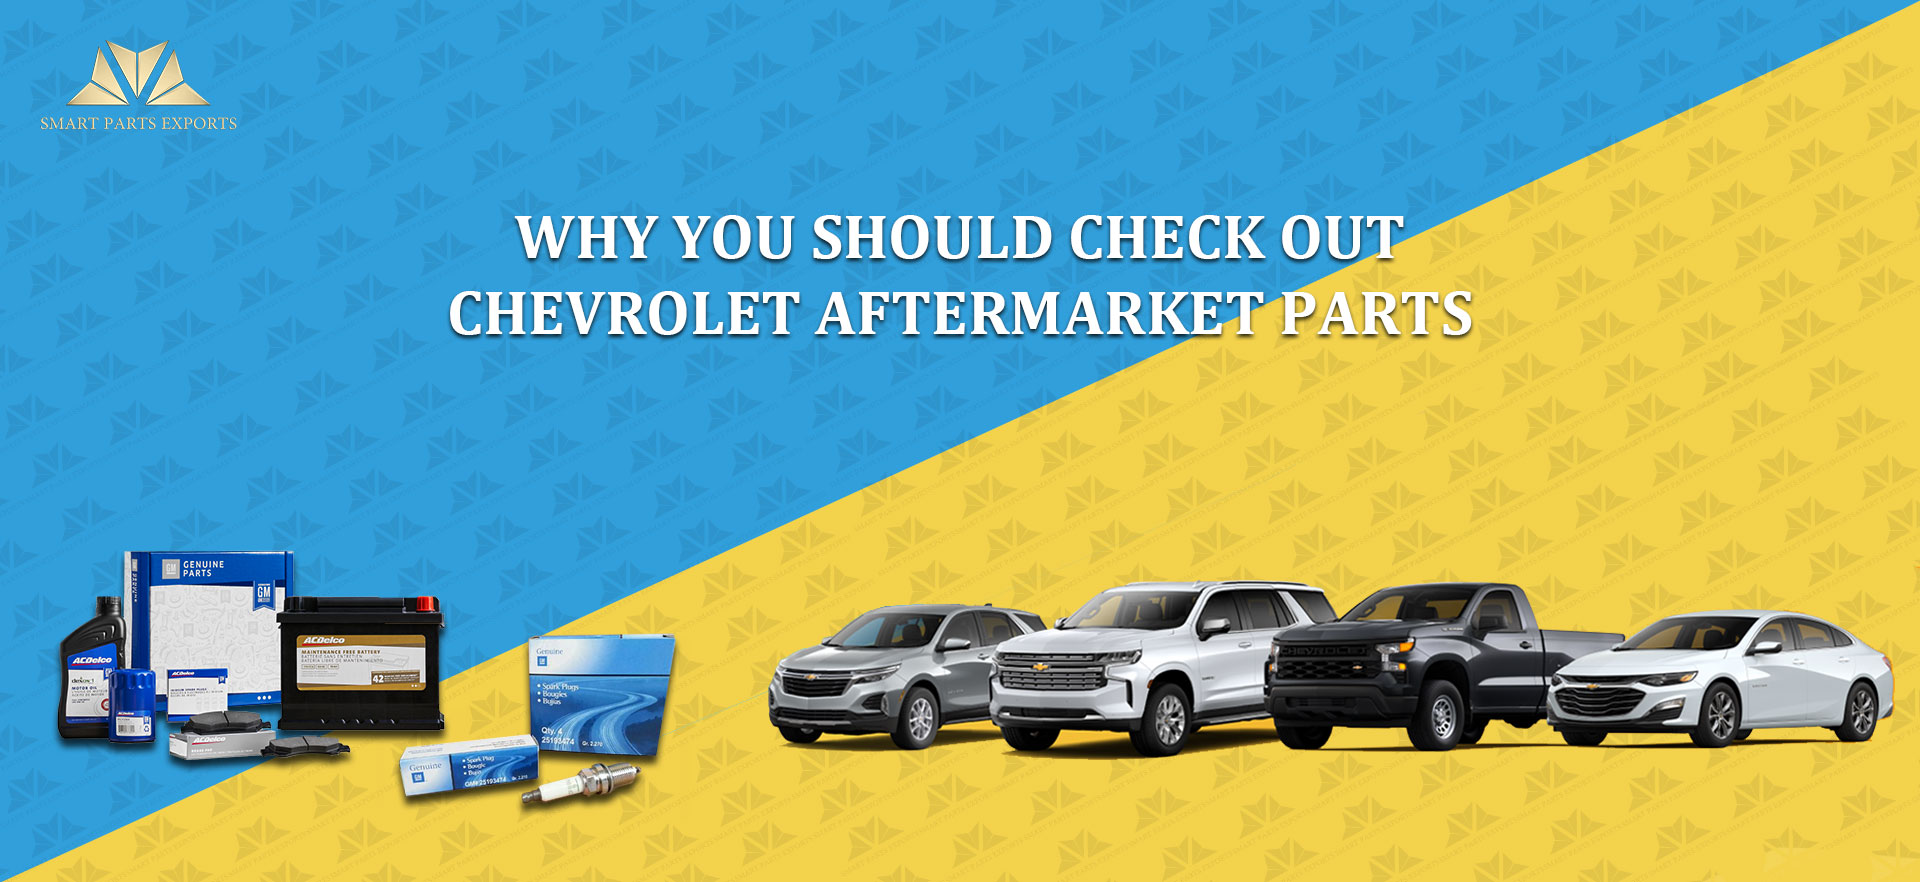 Why You Should Check Out Chevrolet Aftermarket Parts